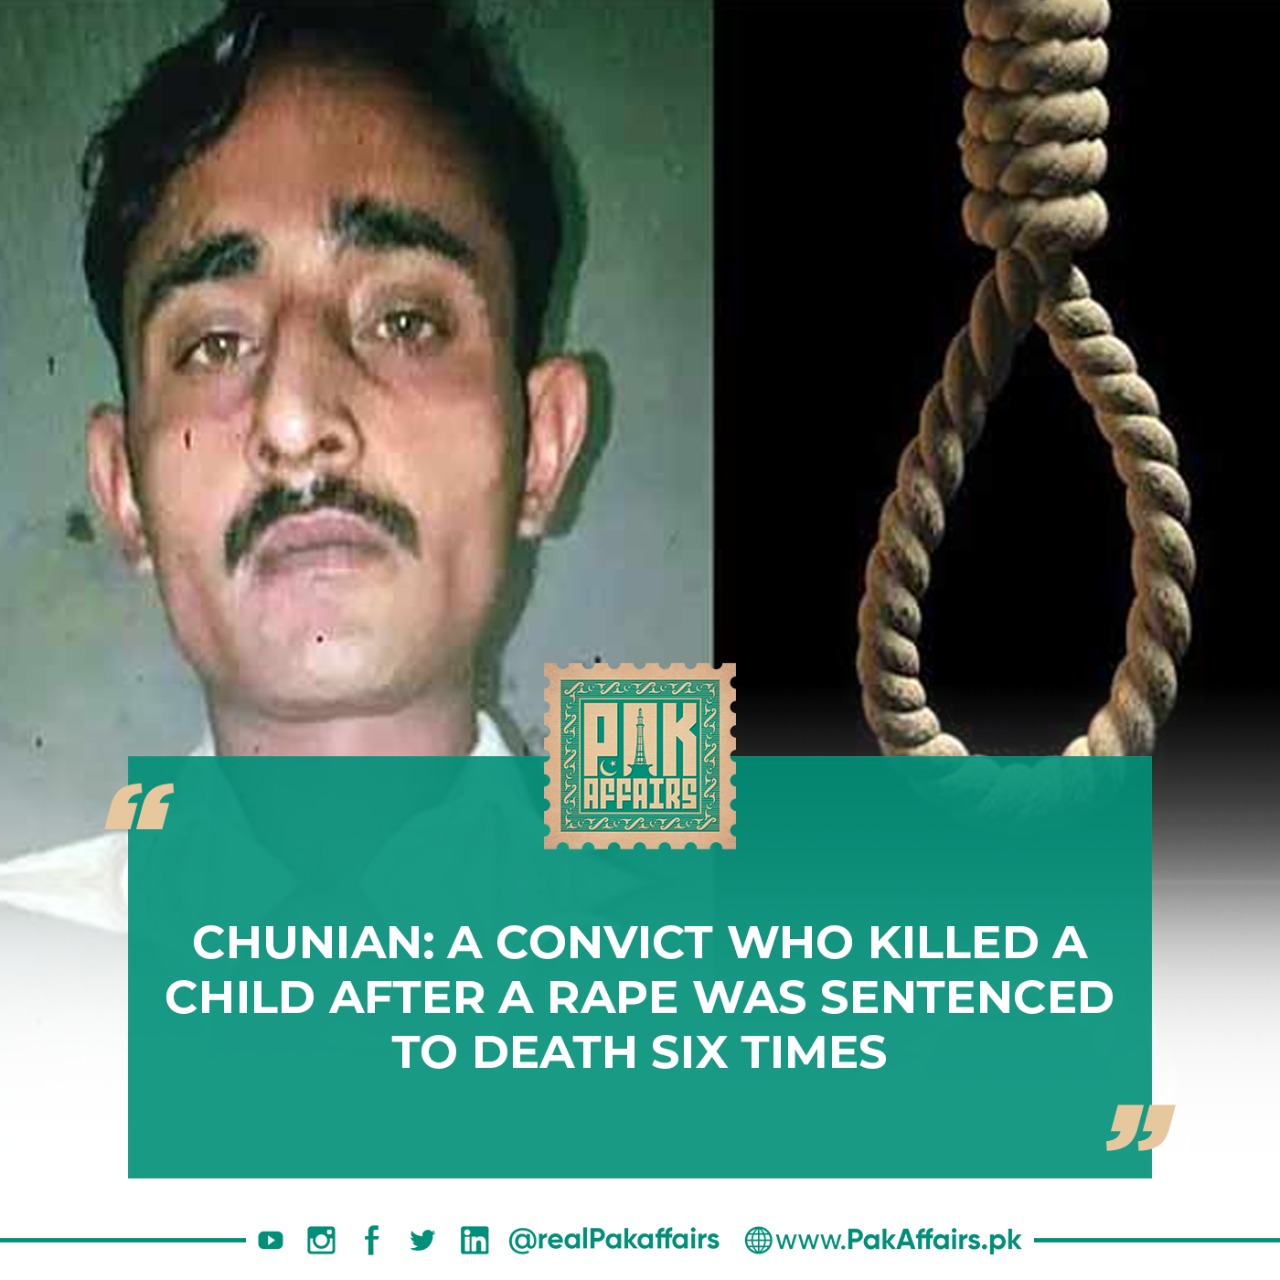 Chunian: A convict who killed a child after a rape was sentenced to death six times